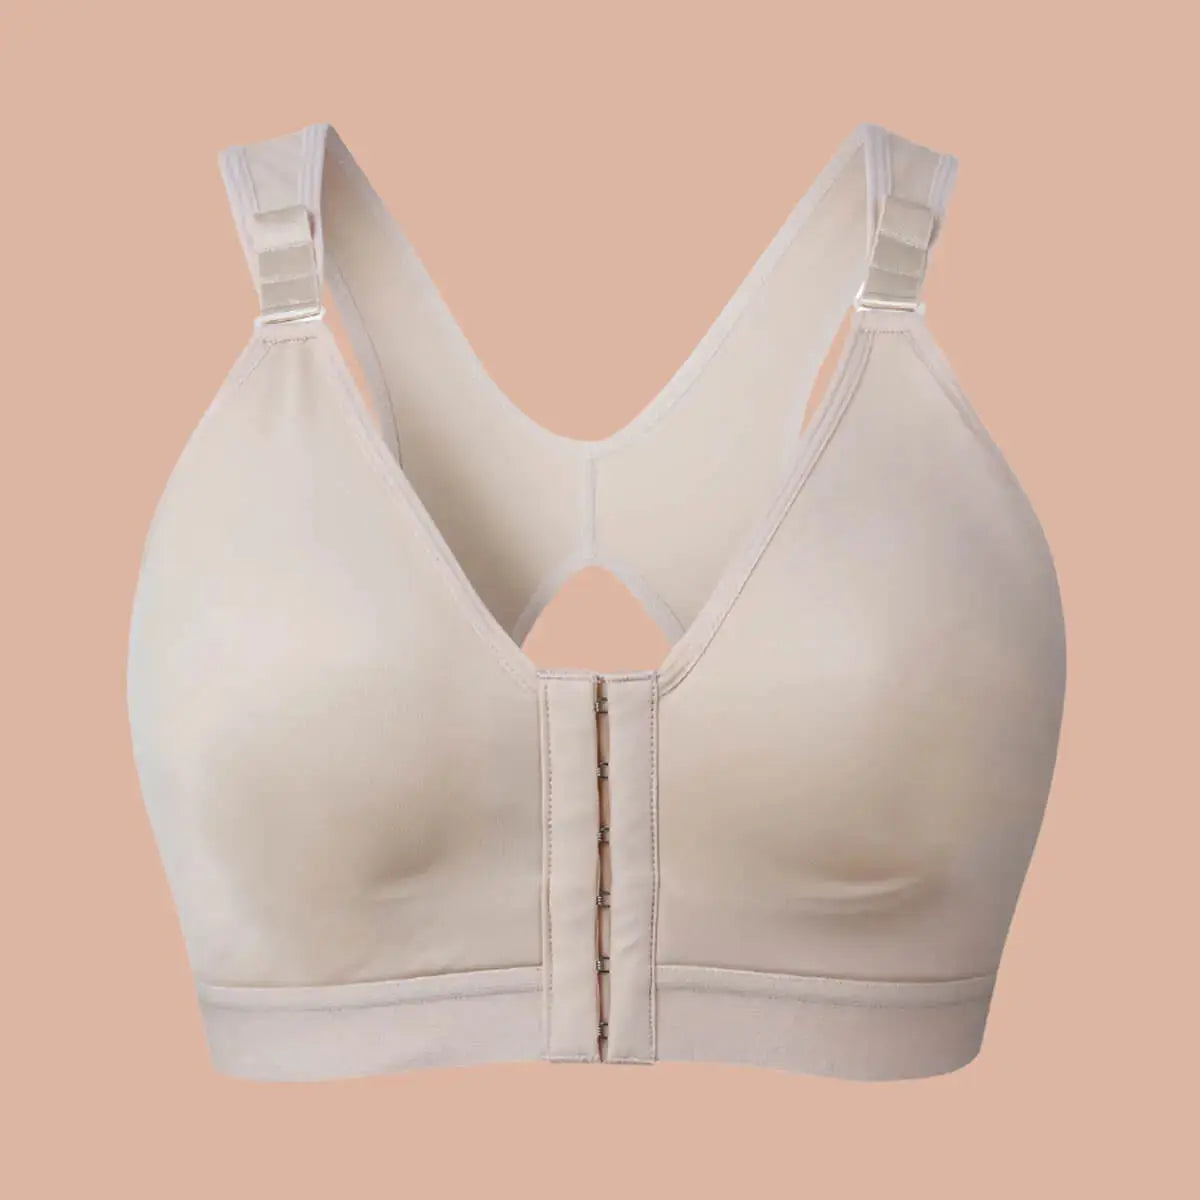 S LUKKC LUKKC Front-Close Shaping Wirefree Bras for Women, Women's  Post-Surgery Front Closure Brassiere Comfort Full-Coverage Bralette Non-Adjustable  Bra Everyday Underwear on Clearance! 